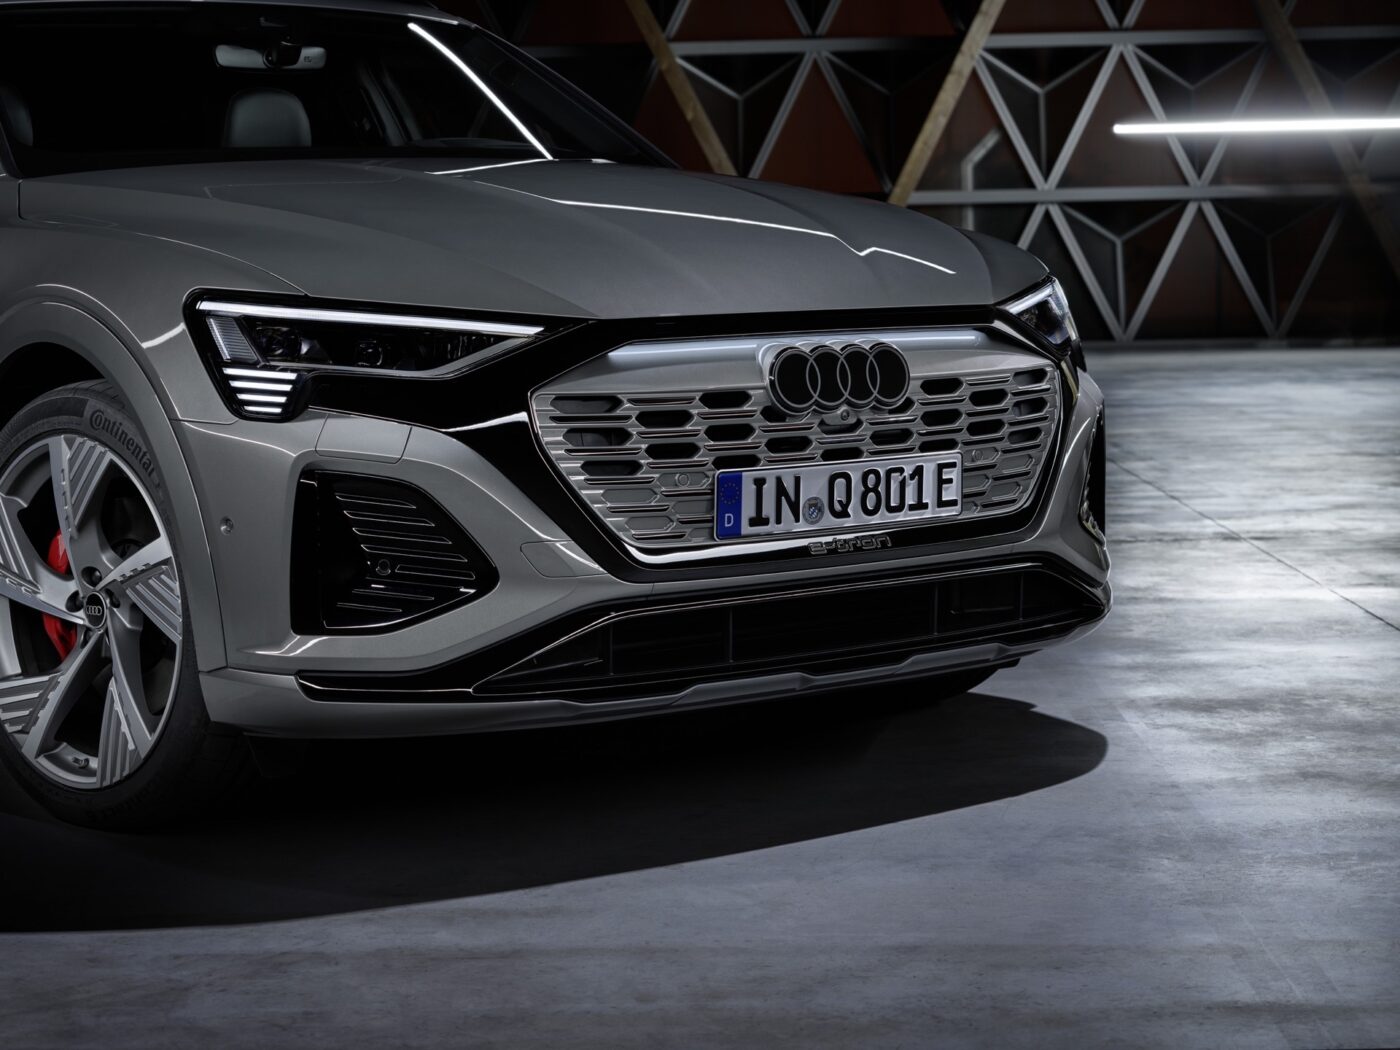 The Audi Q8 e-Tron arrives with improved looks and performance